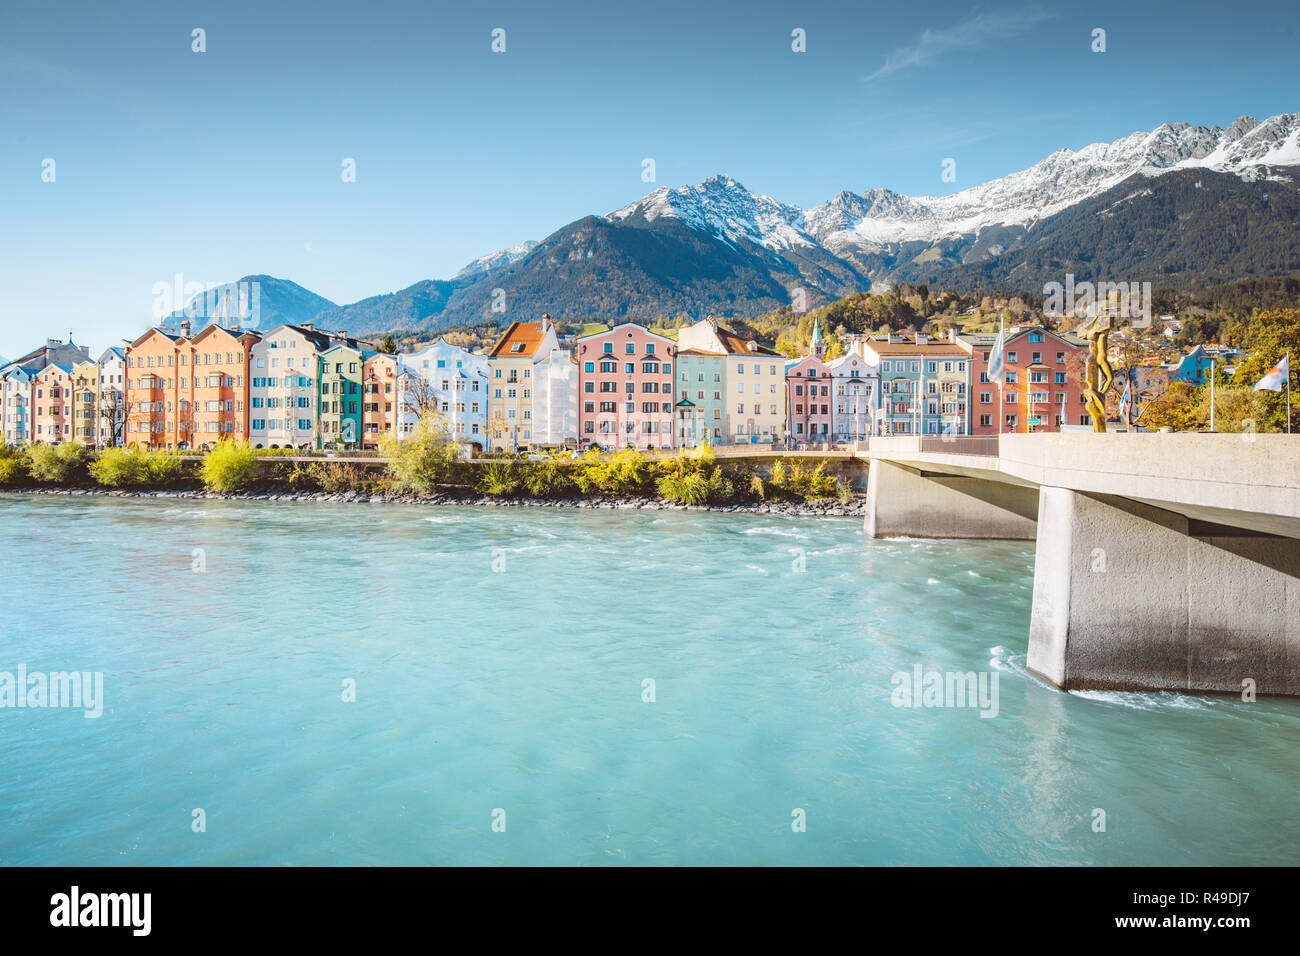 Historic city center of Innsbruck with colorful houses along Inn river and famous Austrian mountain summits in the background, Tyrol, Austria Stock Photo